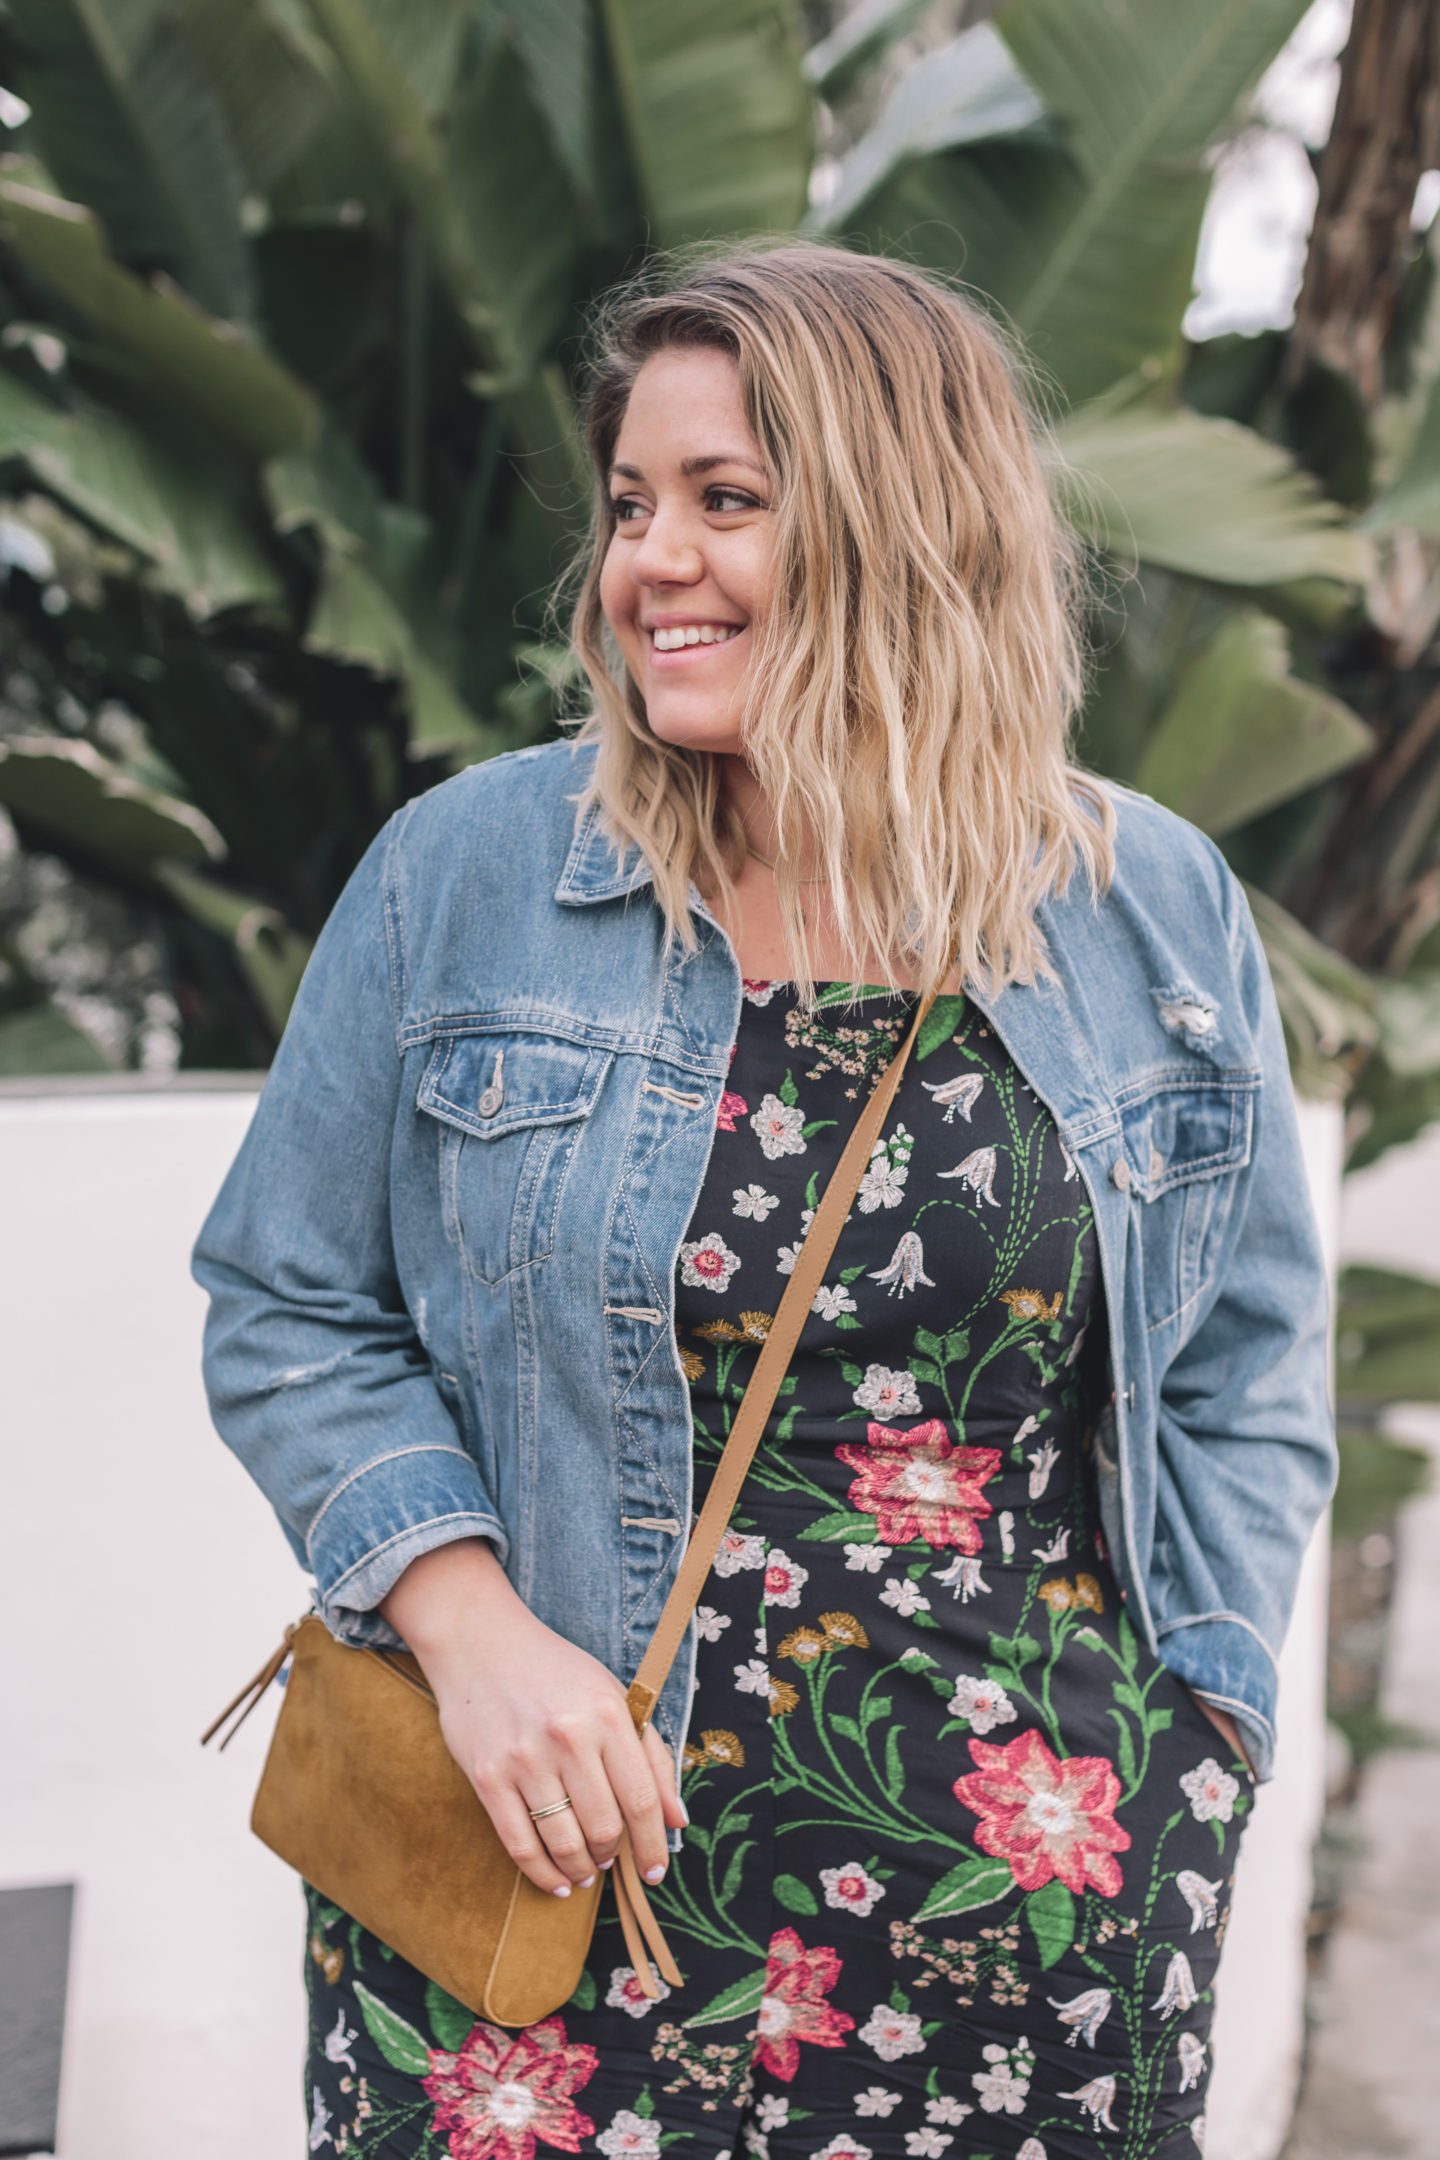 Spring It On! - Floral Jumpsuit - wander abode, spring outfit